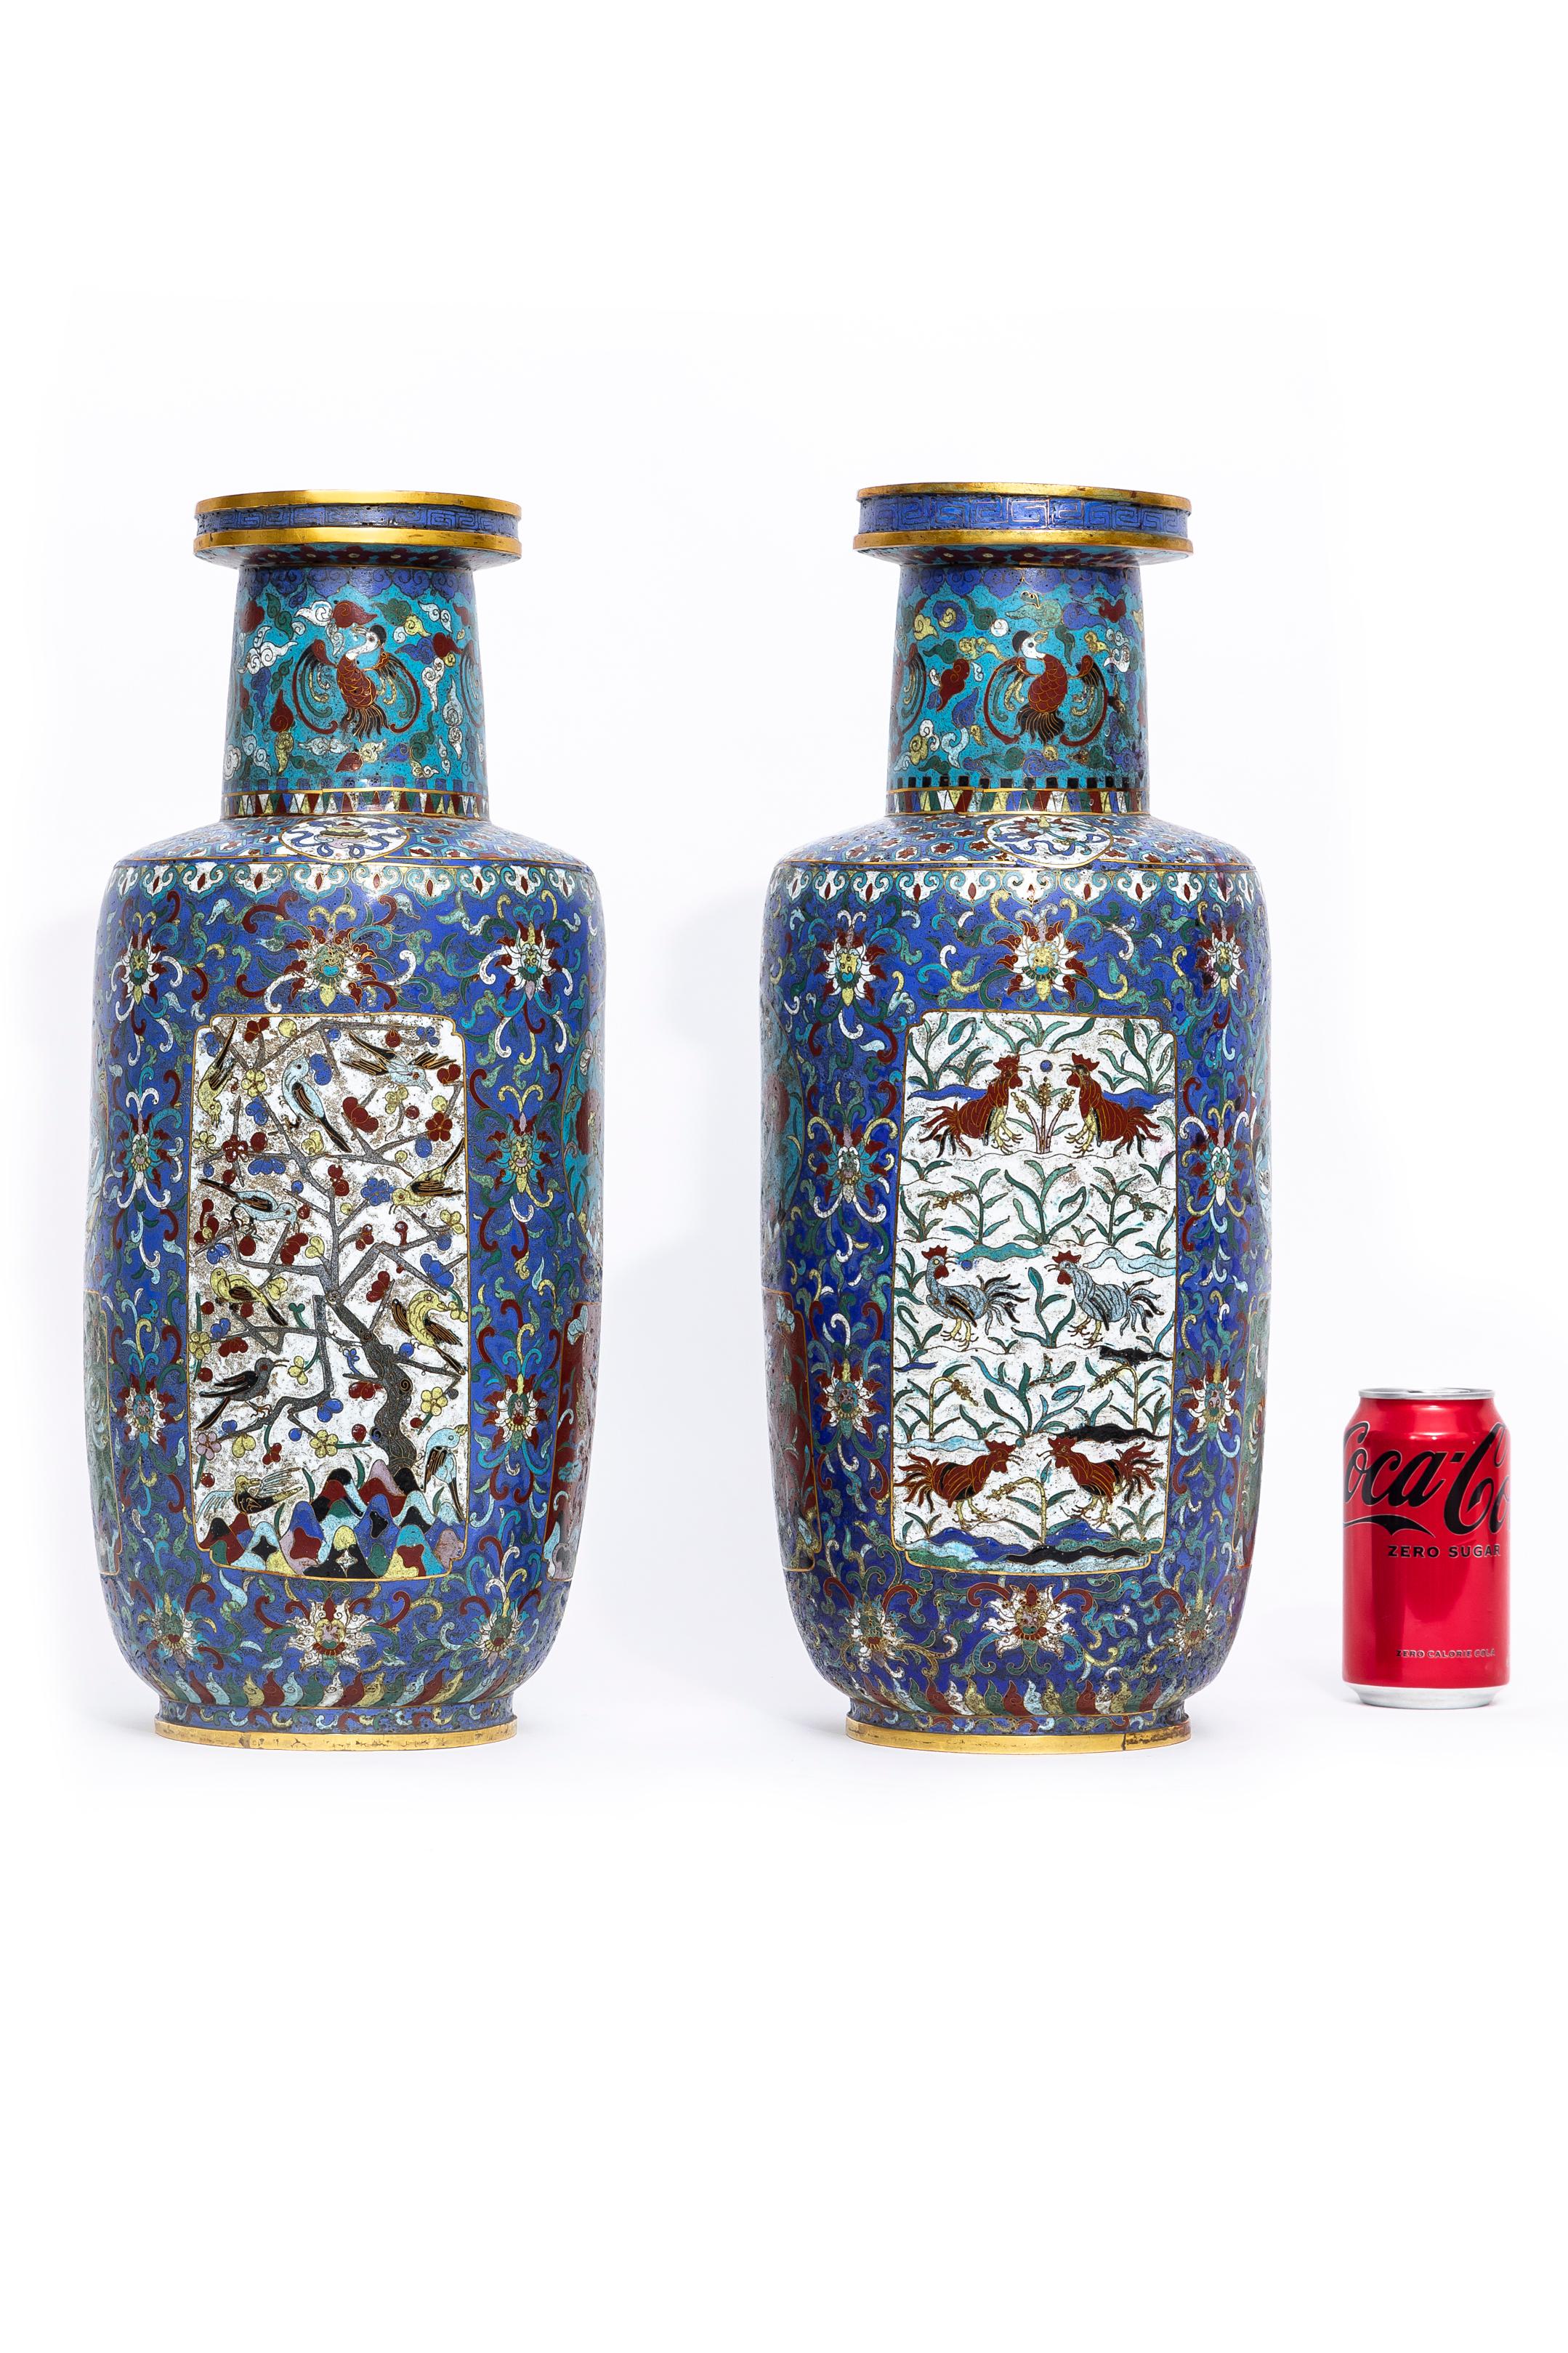 A Gorgeous Pair of Antique Chinese 19th Century, Qing Dynasty, Cloisonne Multi-Cartouche Blue Ground Gu Form Vases.  These vases feature a surface detailed with birds, plants, and clouds inhabiting an abstracted landscape. Organized into several